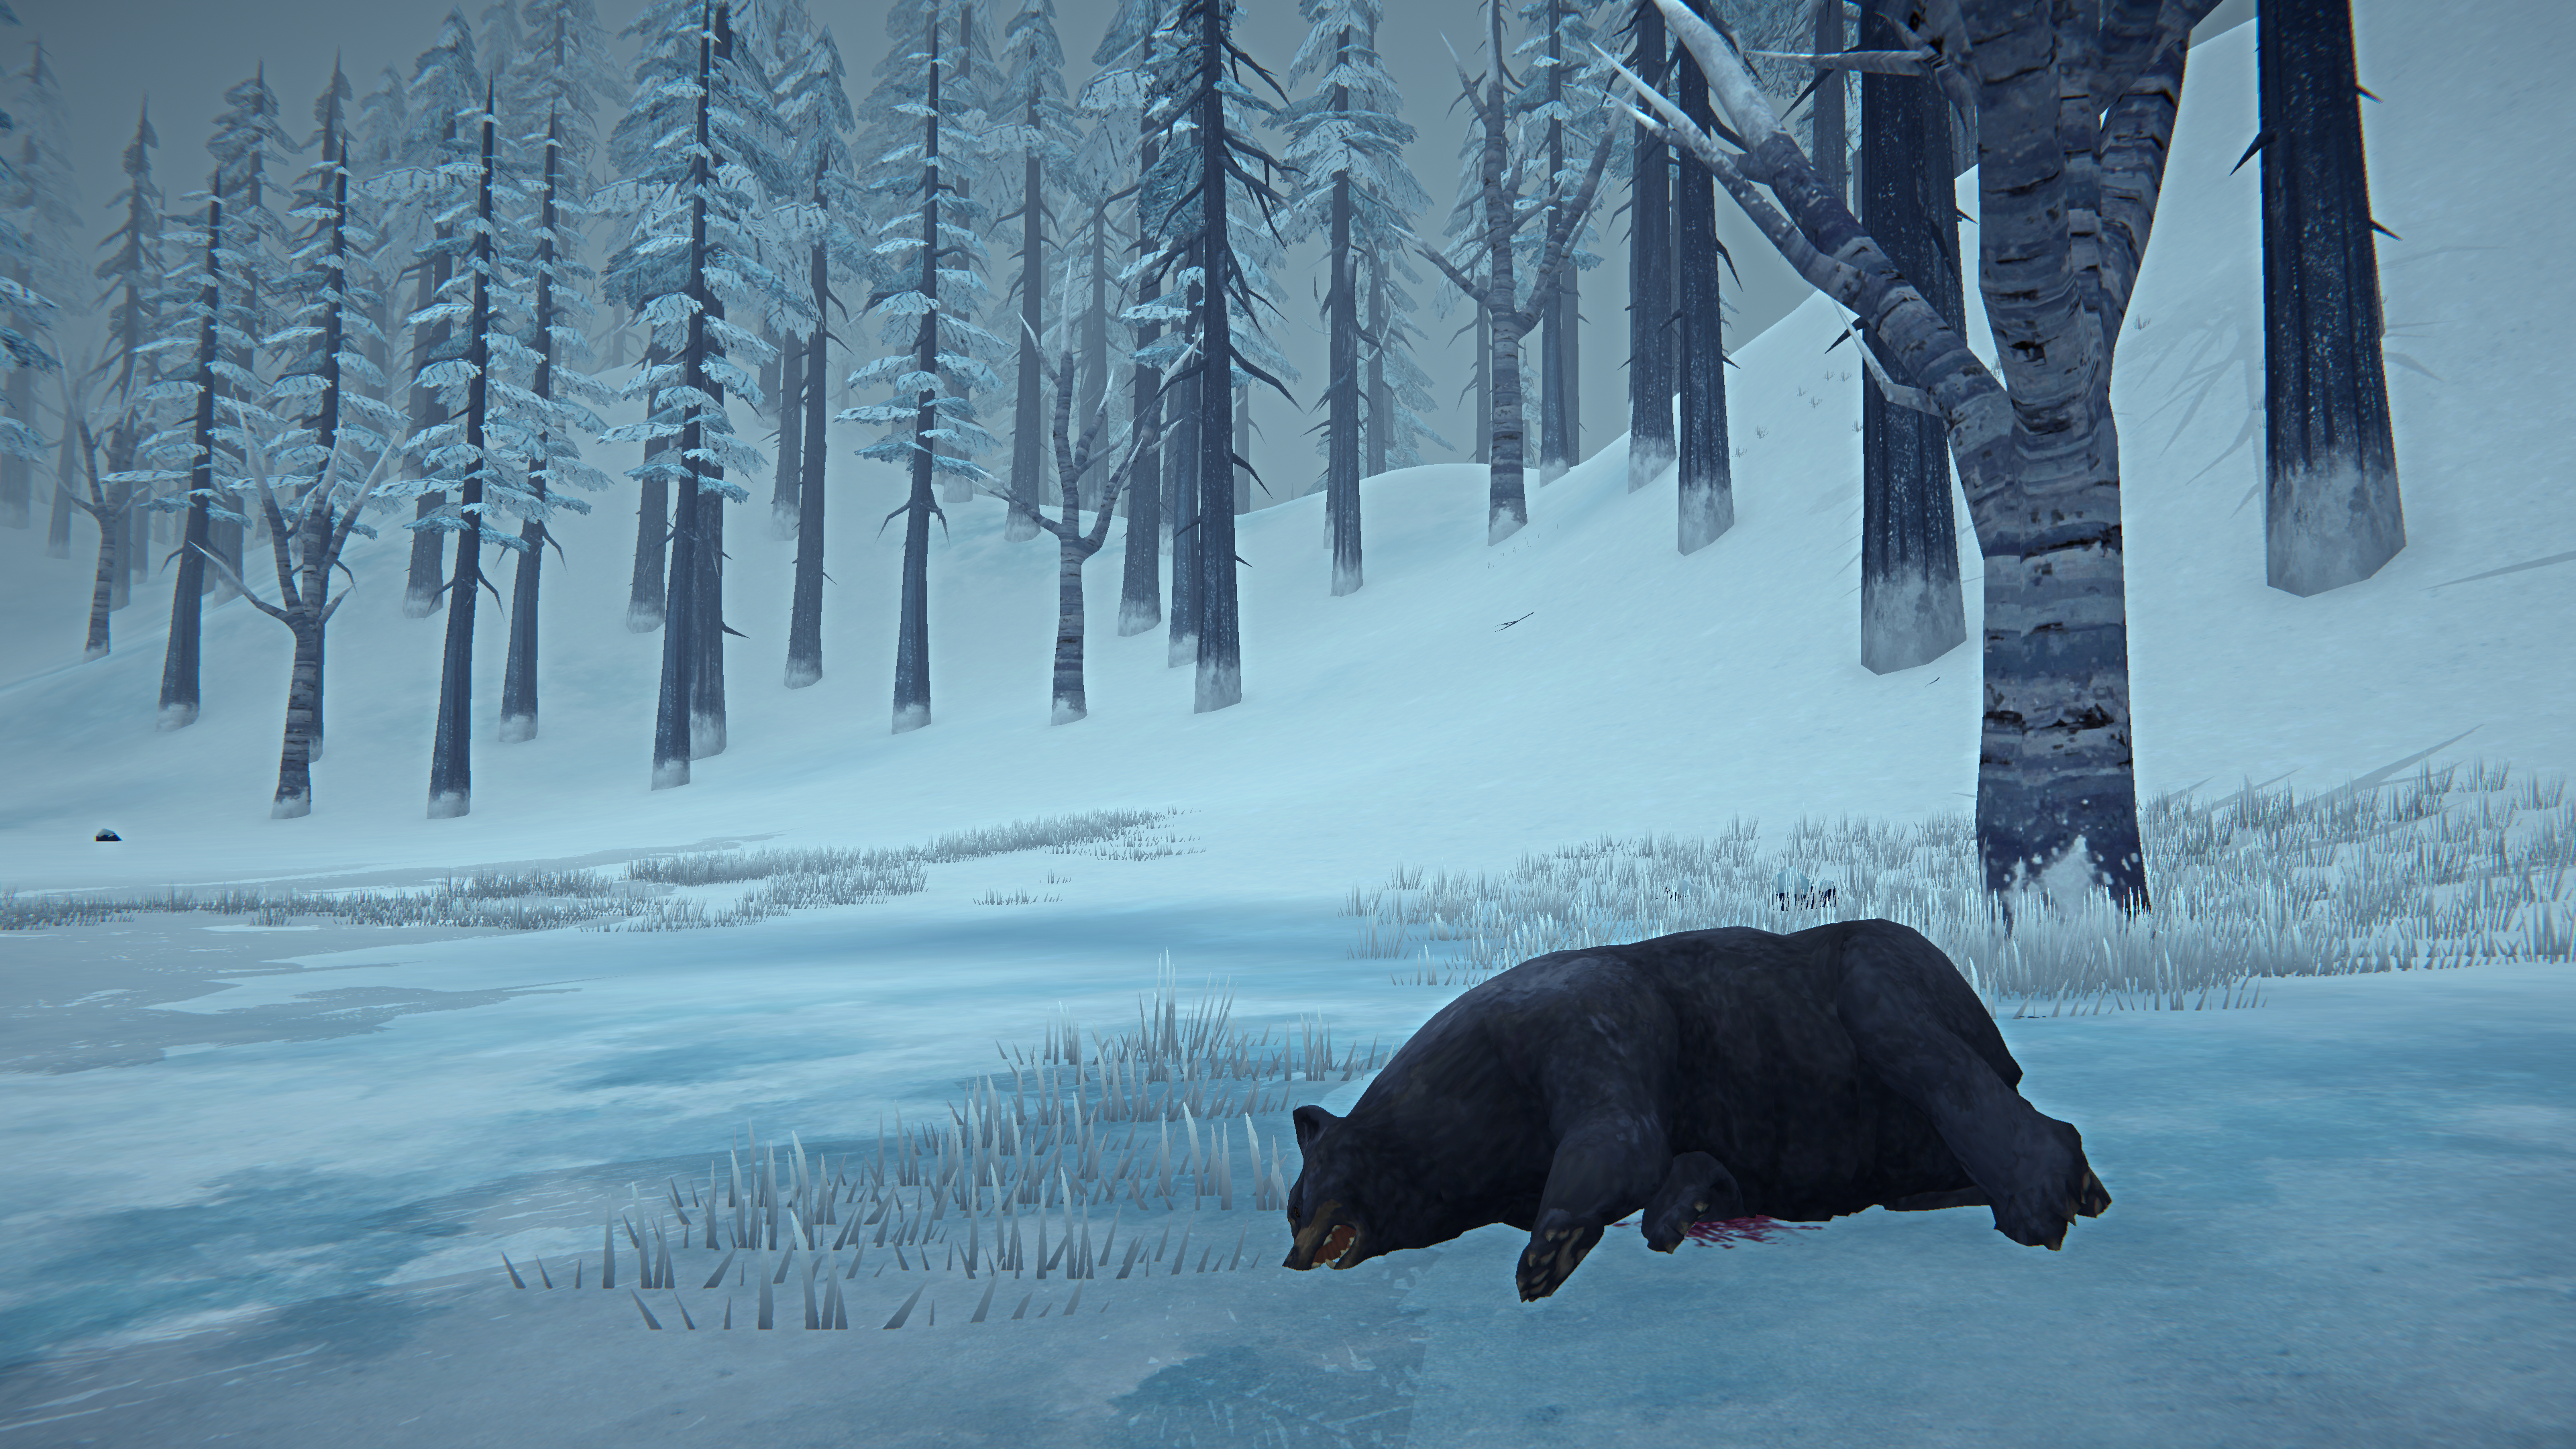 General 3840x2160 The Long Dark PC gaming video game landscape survival screen shot snow bears hunting winter nature video games